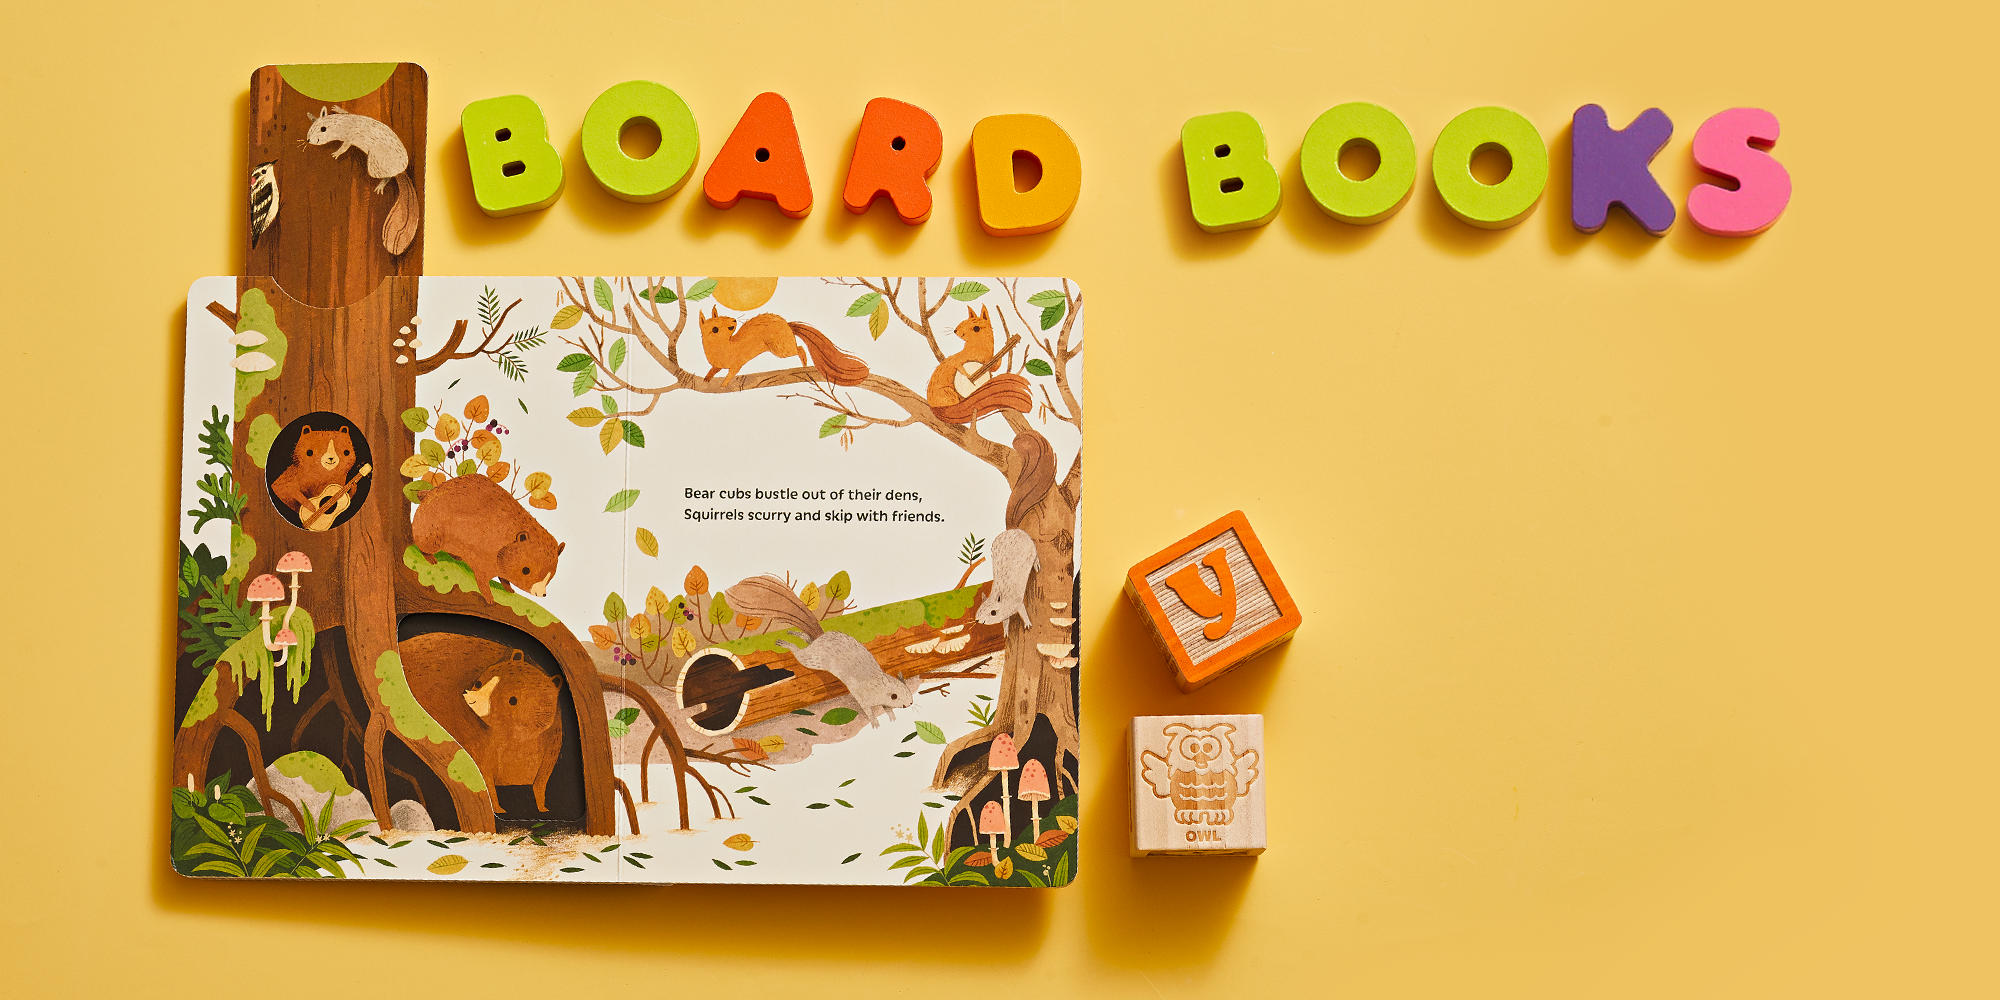 open book on yellow background with colorful blocks spelling out board books